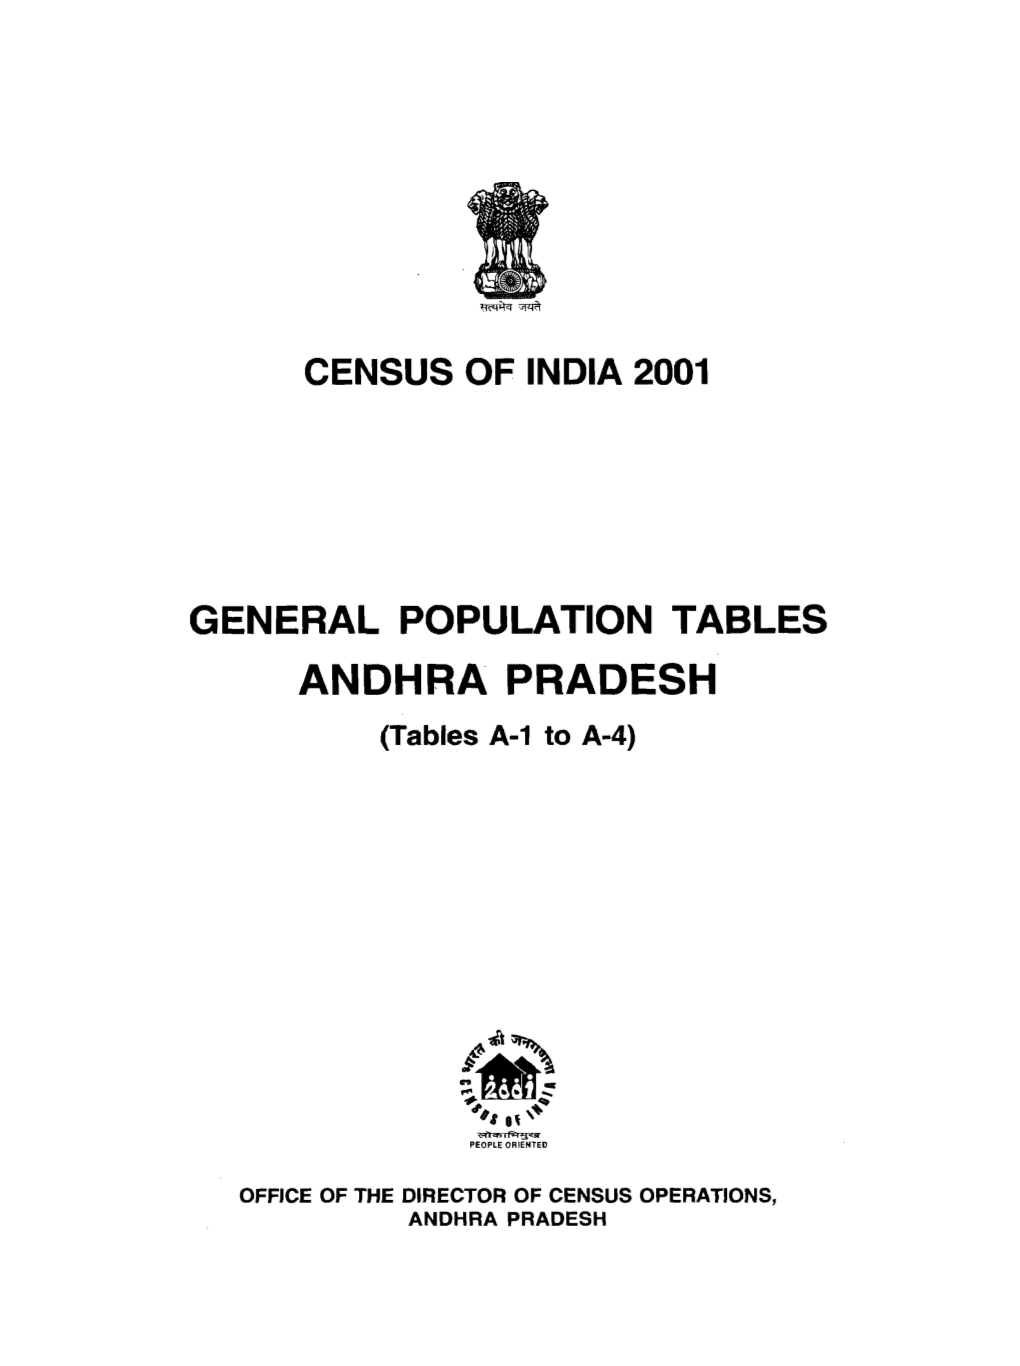 GENERAL POPULATION TABLES ANDHRA PRADESH (Tables A-1 to A-4)